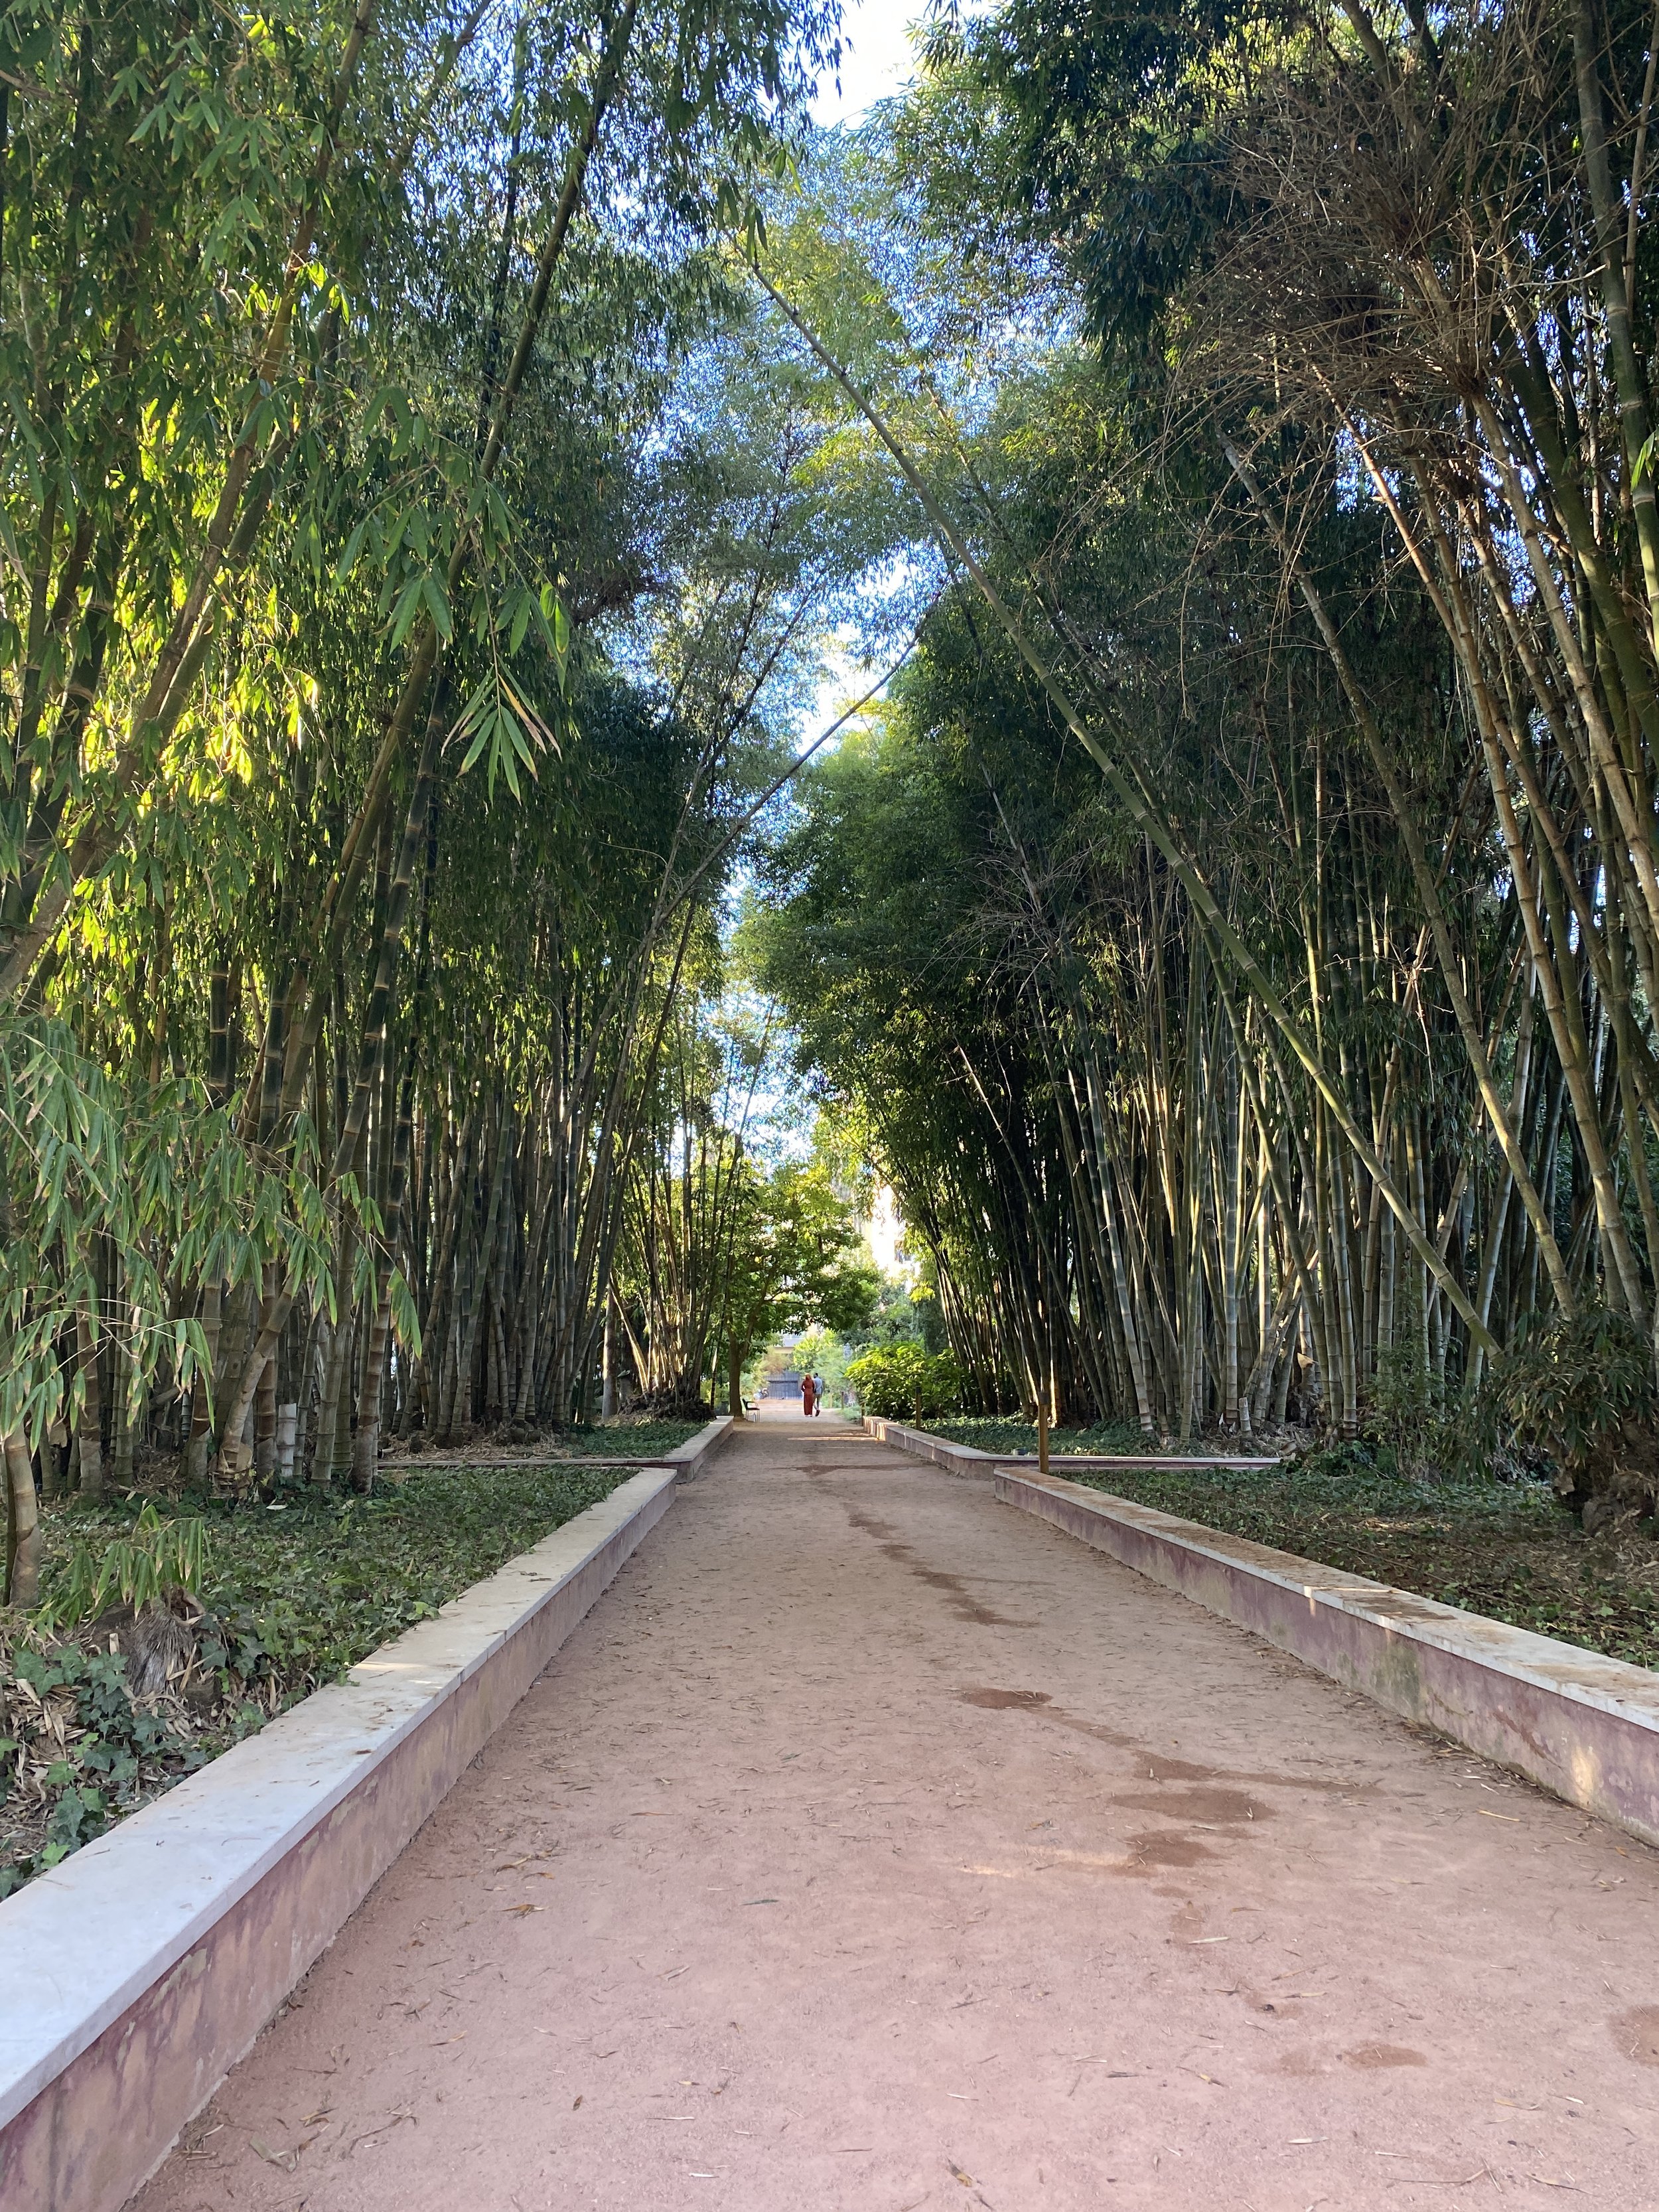  Pathway lined with trees in Andalusian Gardens. Photo credit: Avignon, 2022. 